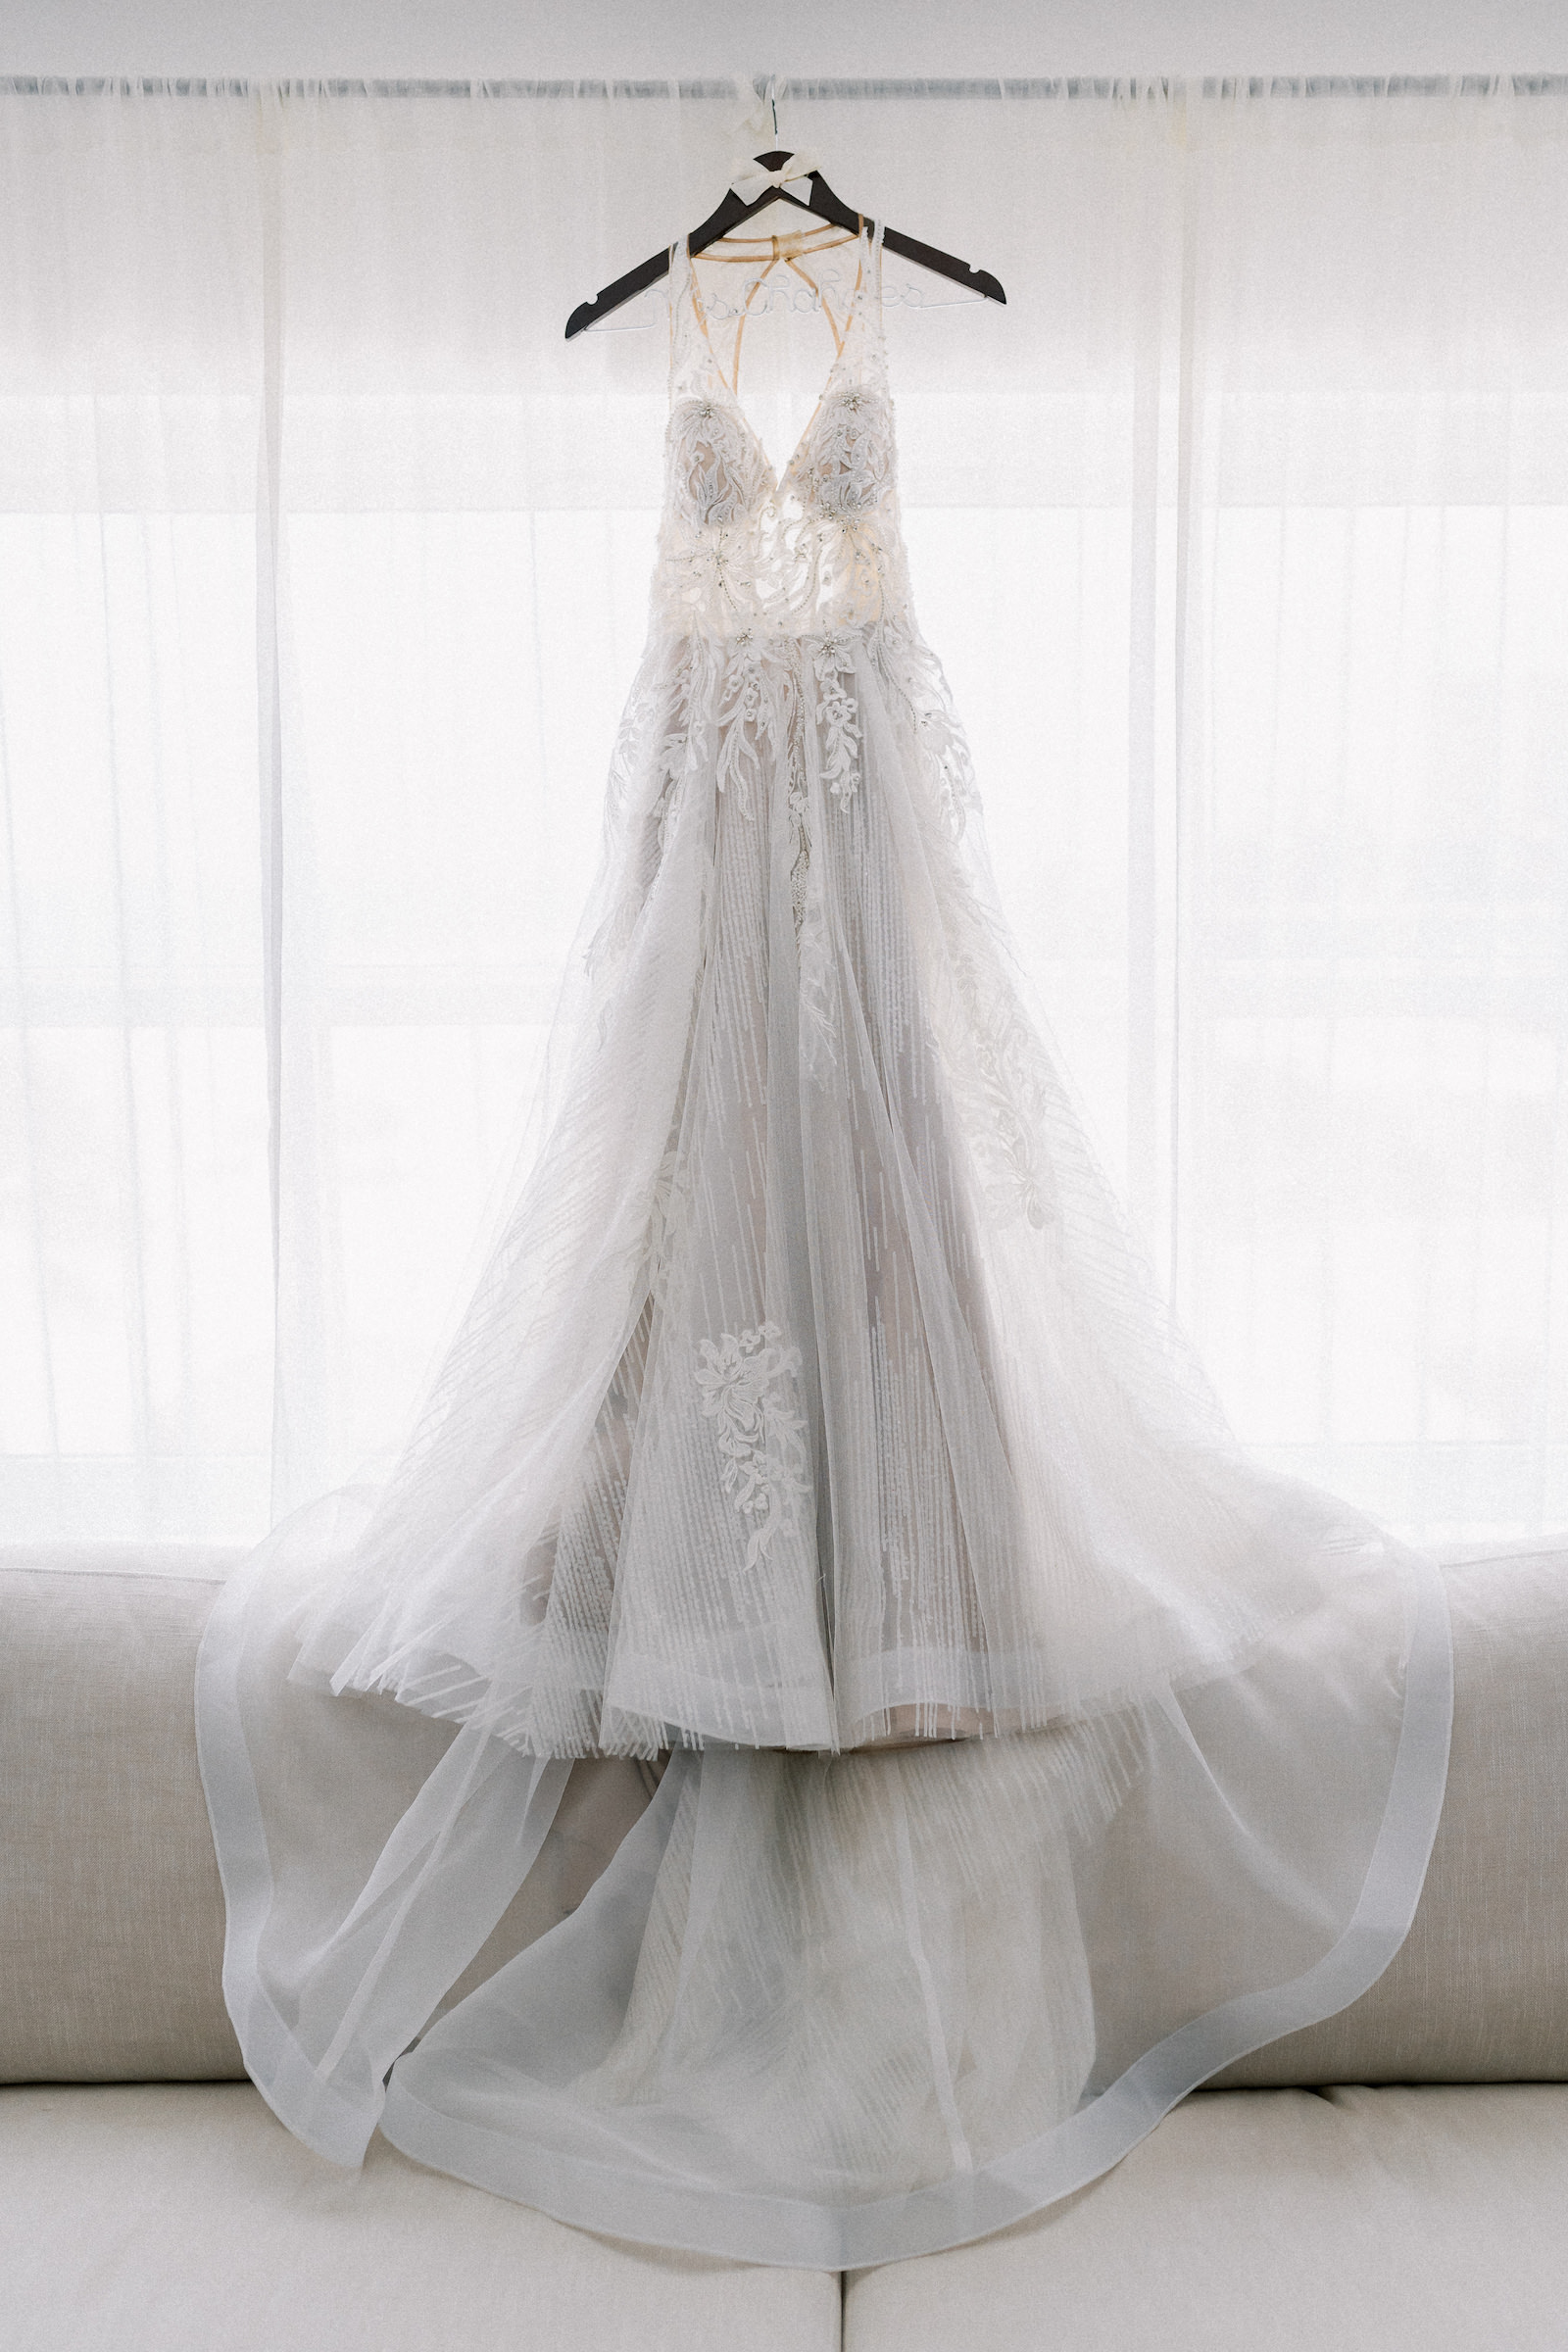 Illusion Wedding Dress with Beading Detail and Lace with Full Tulle Skirt Hanging Up Before the Wedding Portrait